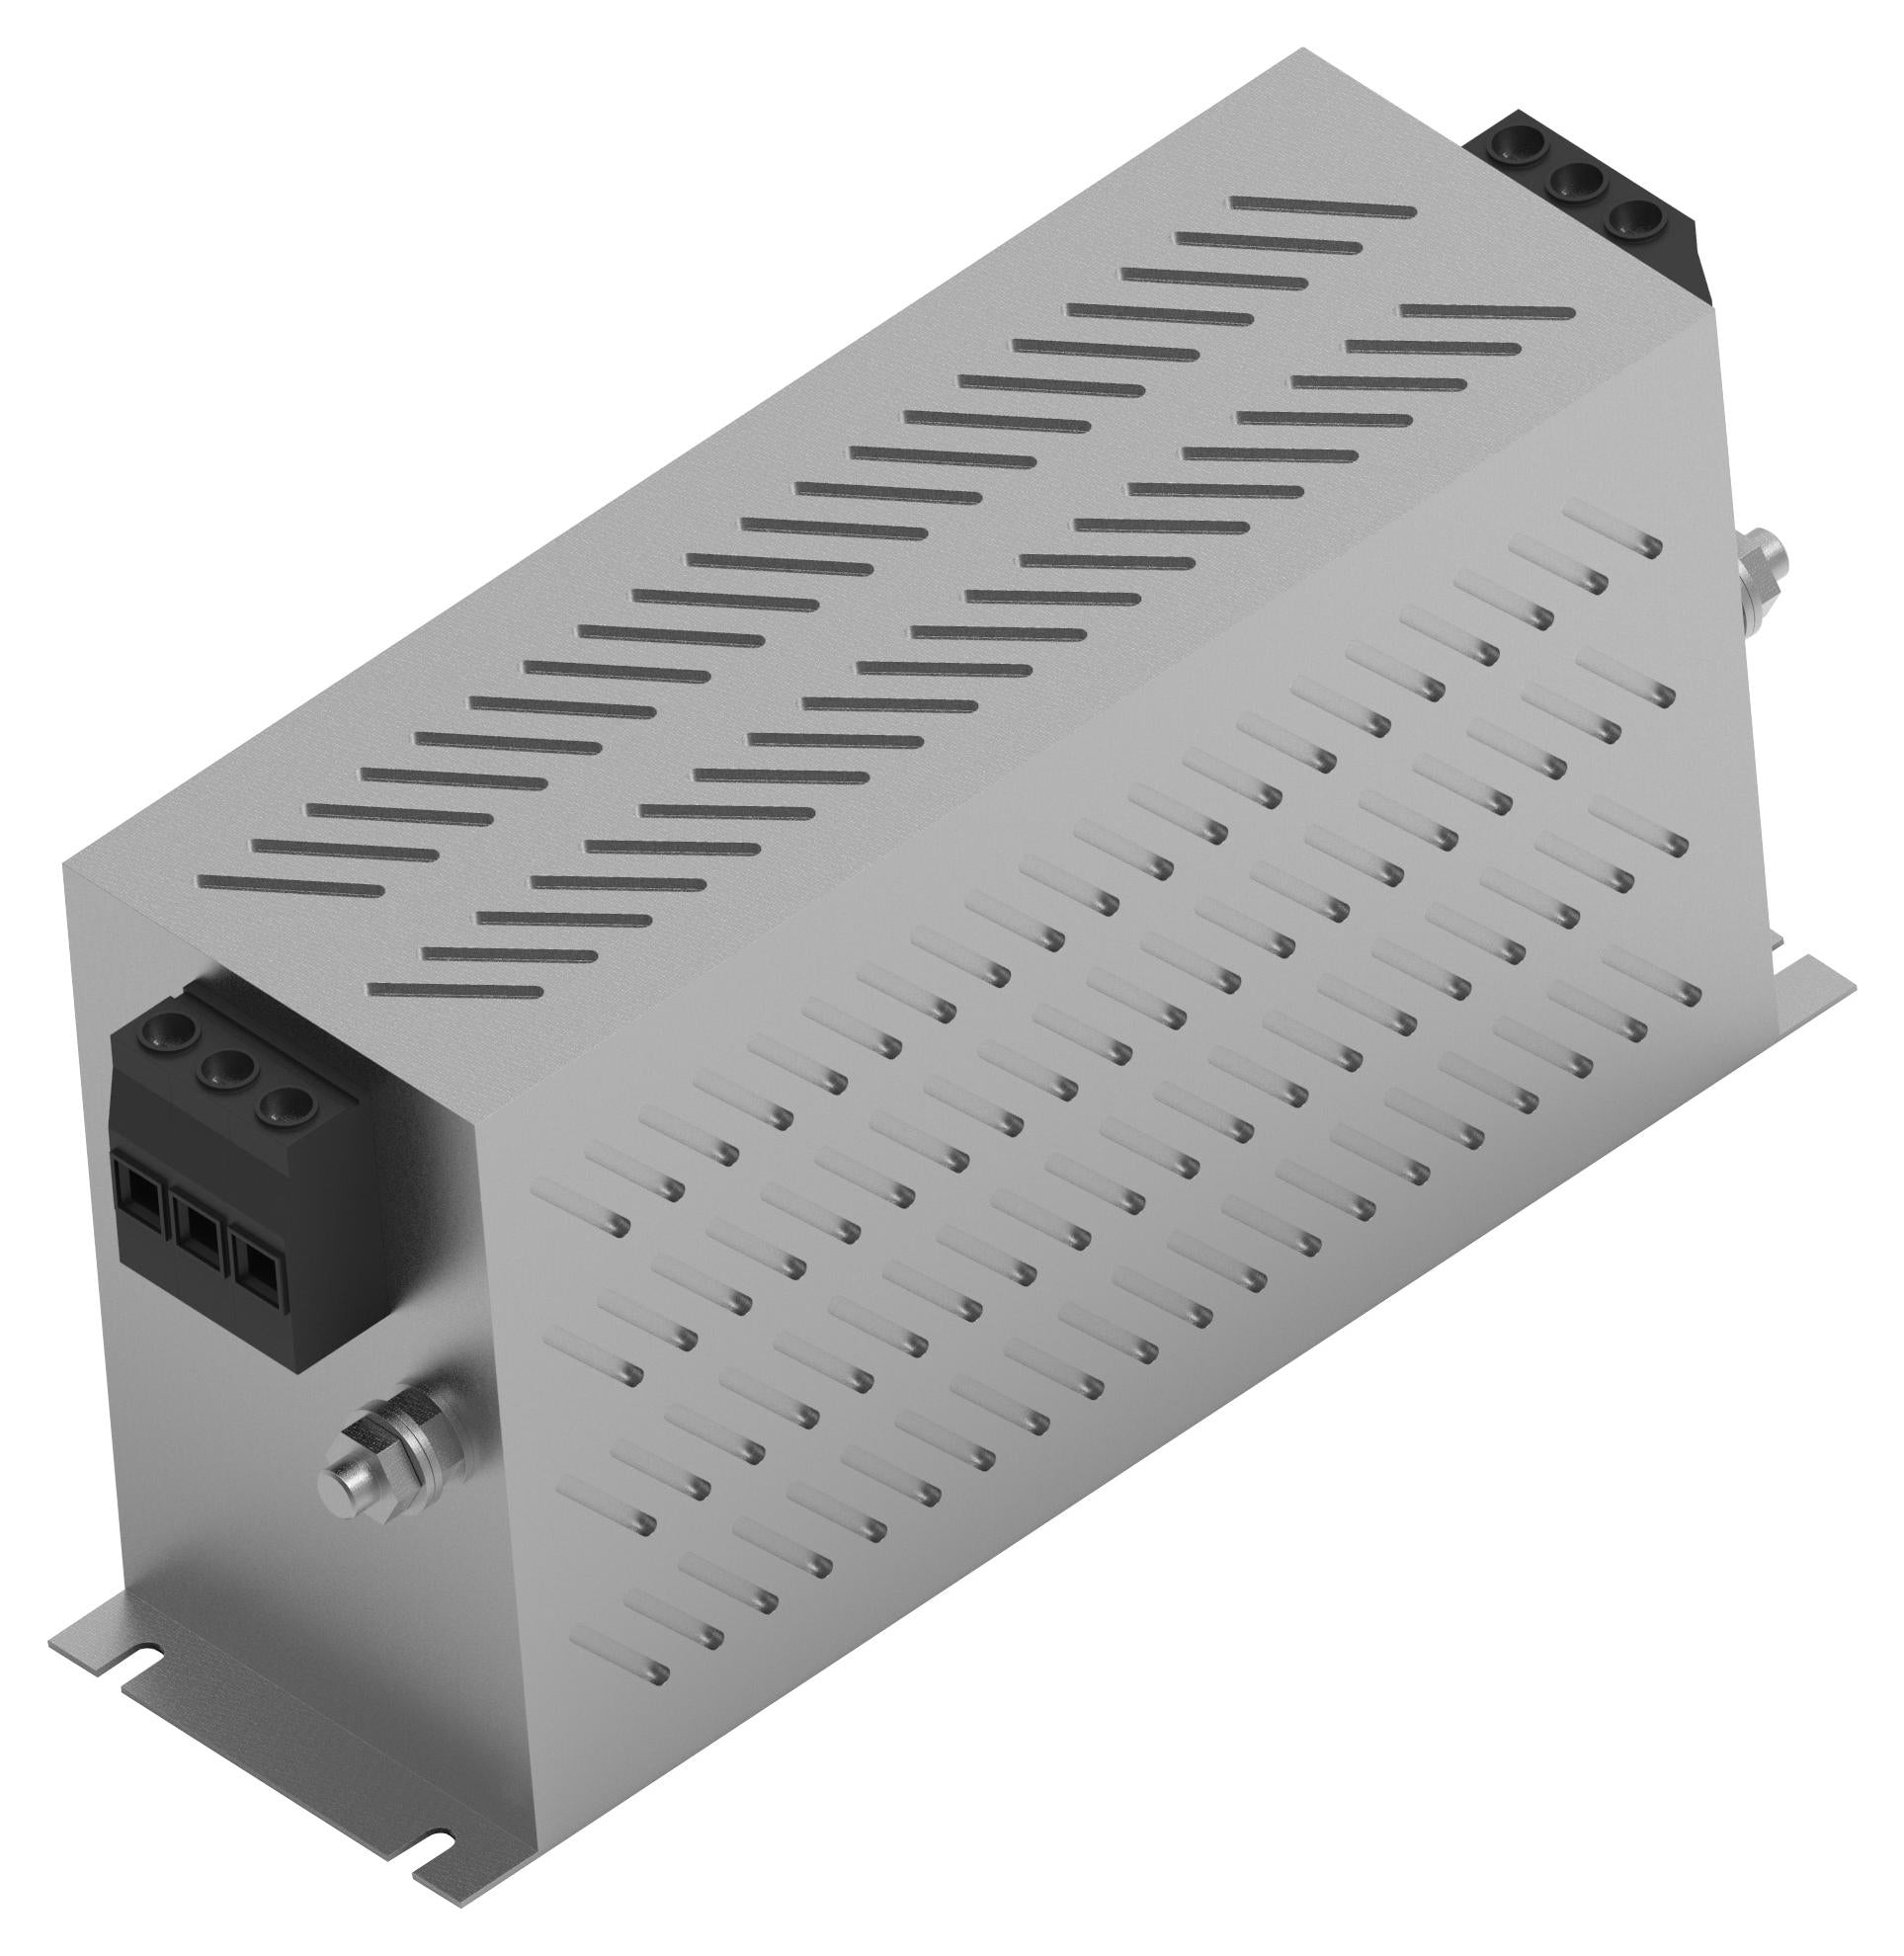 75KEMS10ABSD POWER LINE FILTER, 3 PHASE, 75A, 440VAC CORCOM - TE CONNECTIVITY